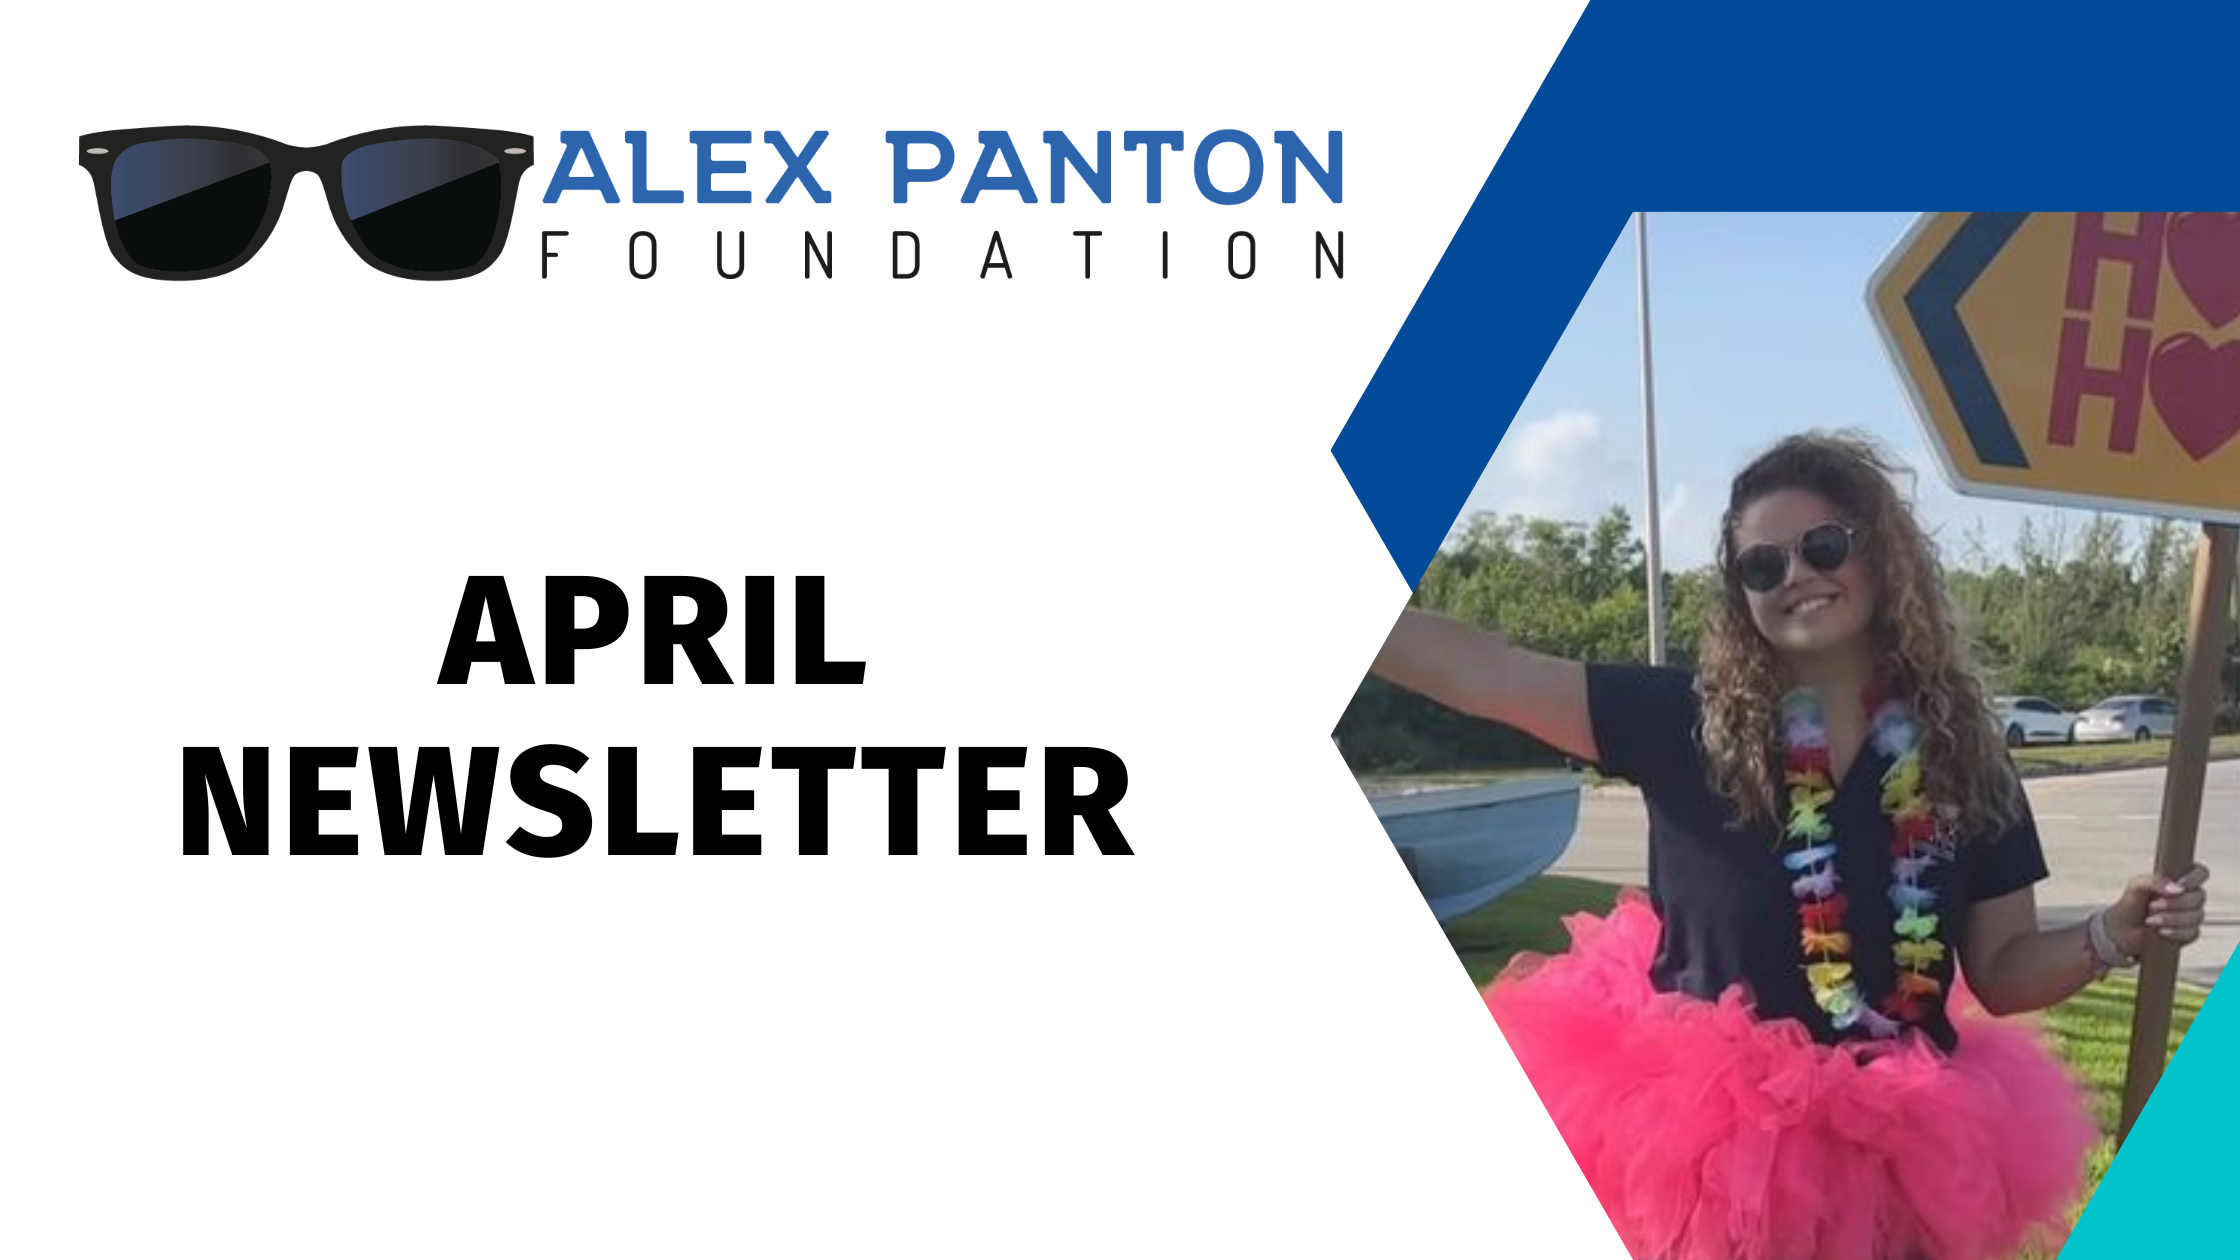 April/May Newsletter